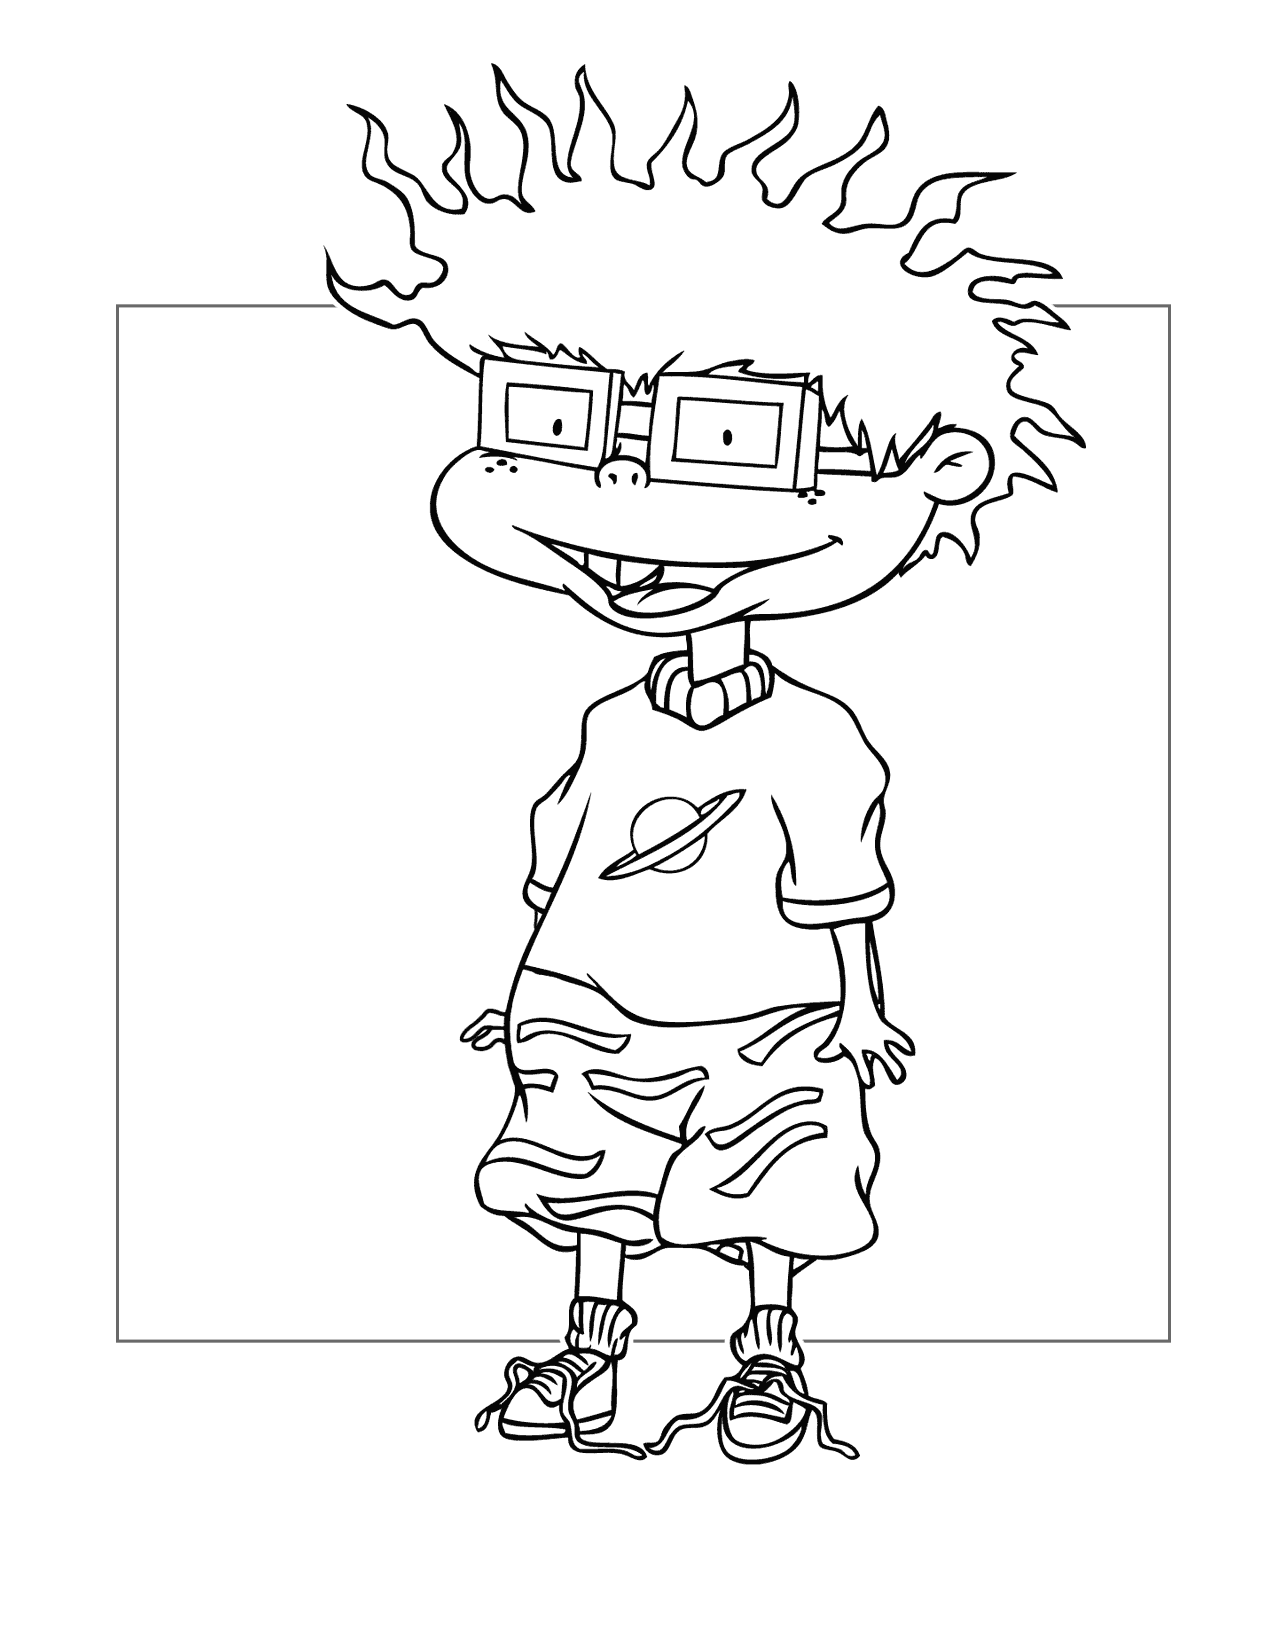 Chuckie Finster Rugrats Coloring Page